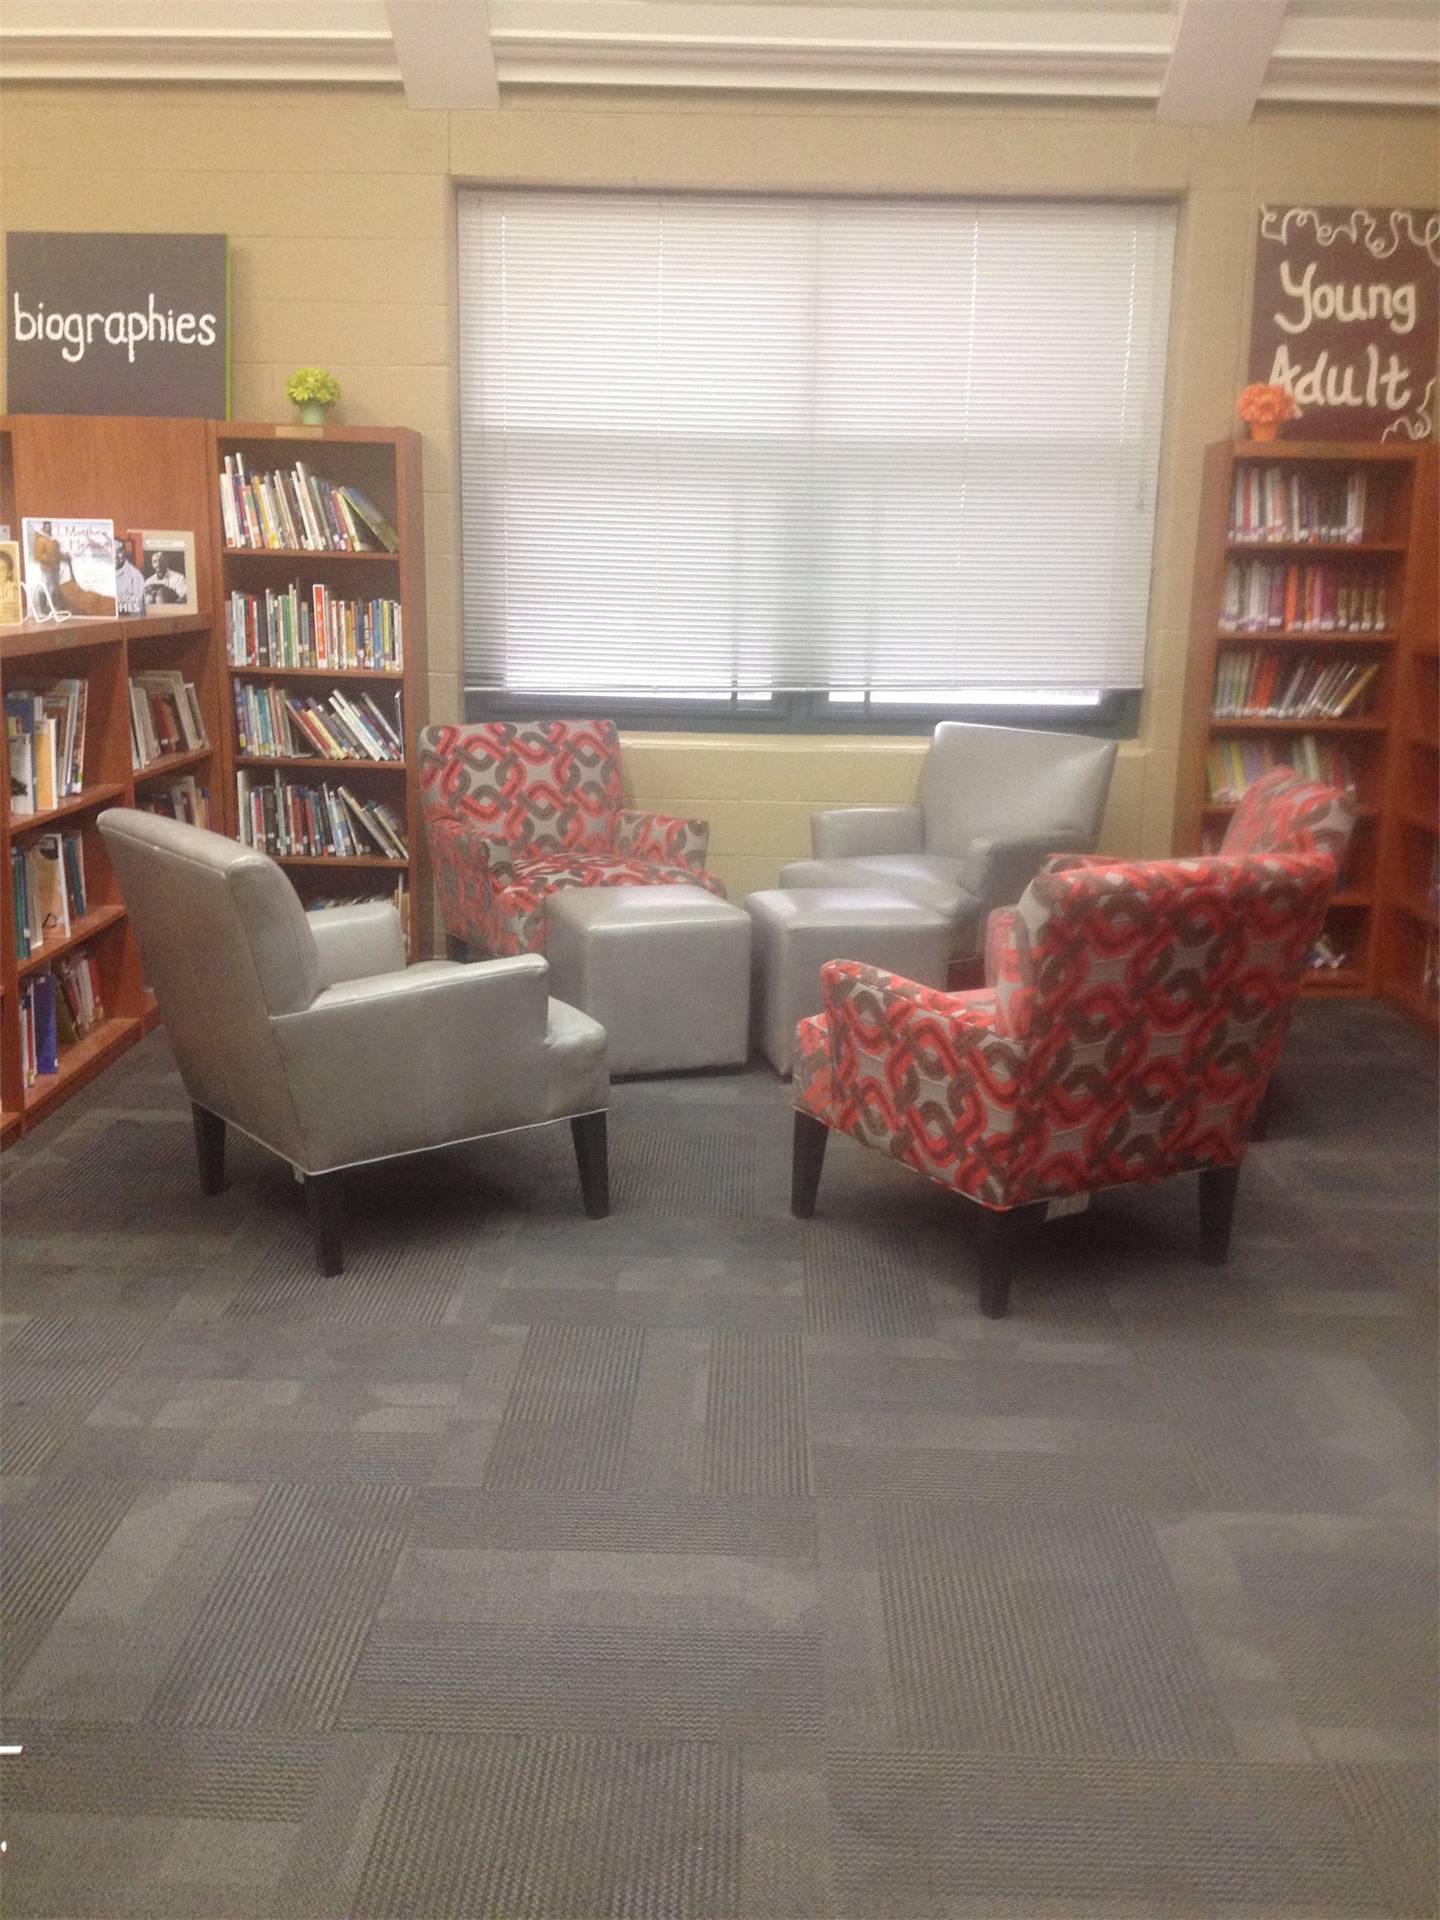 chairs in the library